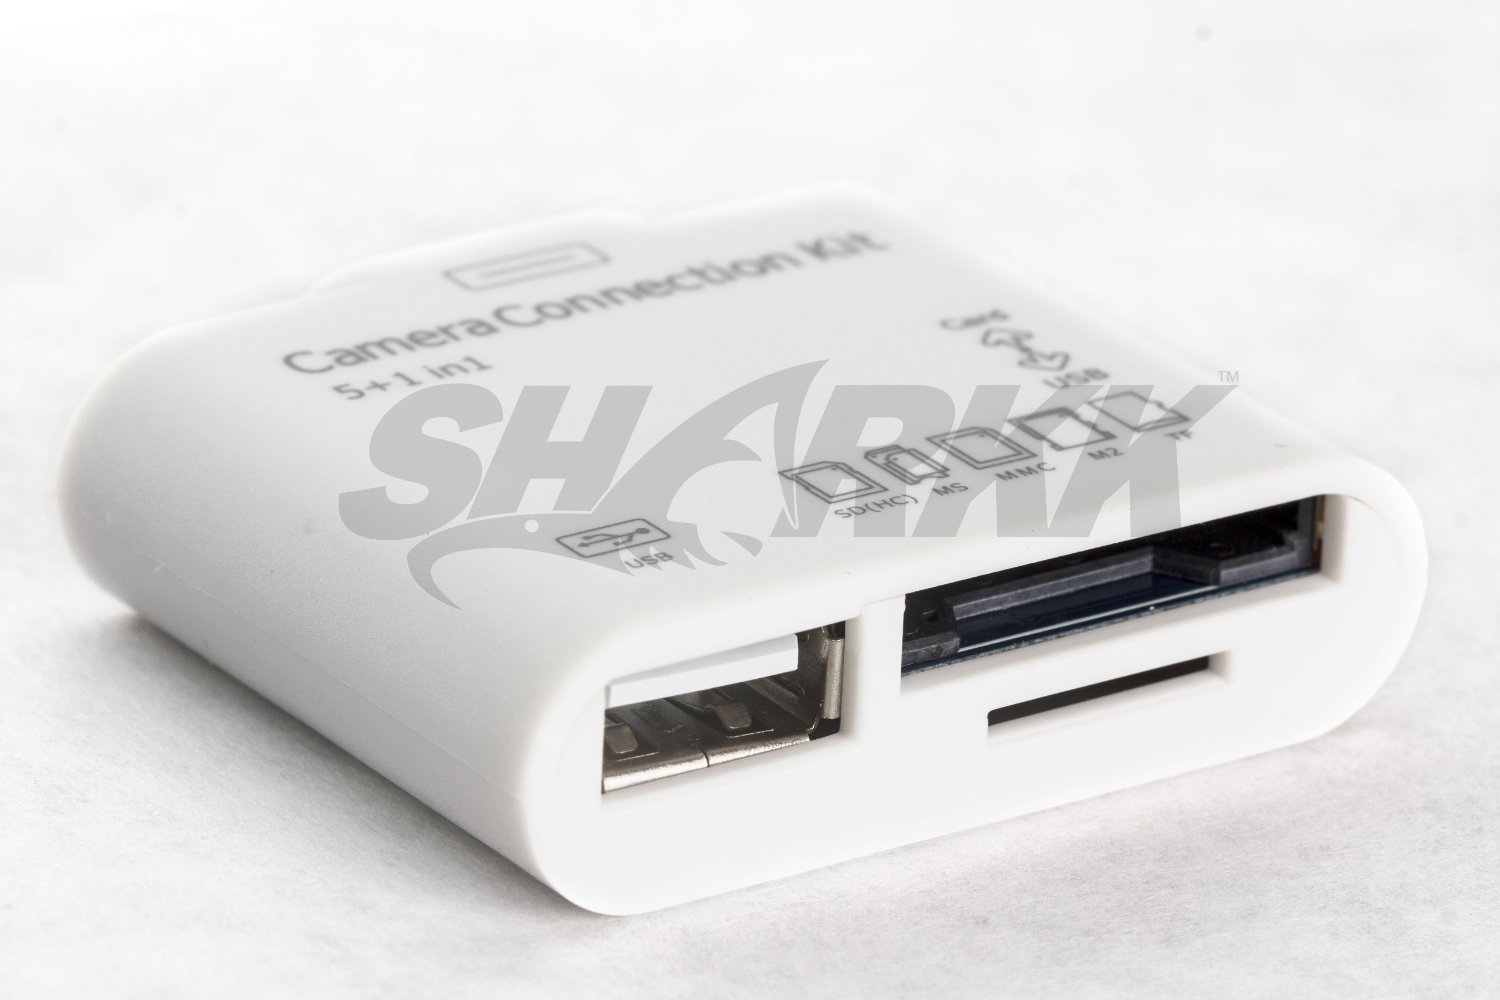 SHARKK® 5 in 1 Card Reader Connects Cameras, USB, & Memory Cards To iPad and iPad2 and The New iPad 3rd Generation (ONLY WORKS WITH PICTURE FILES)